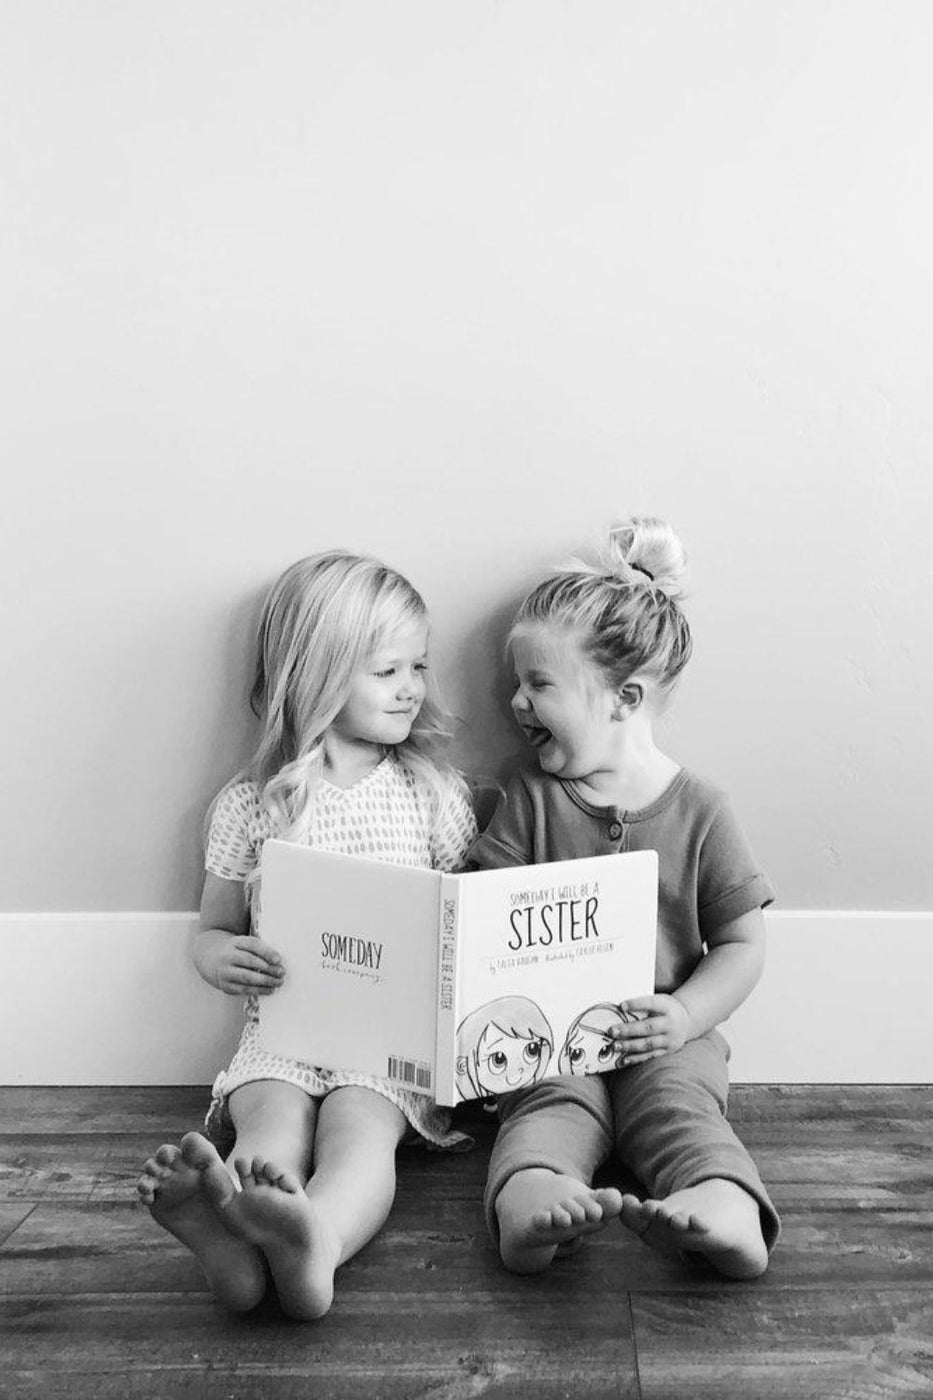 Someday I Will Be A Sister Book